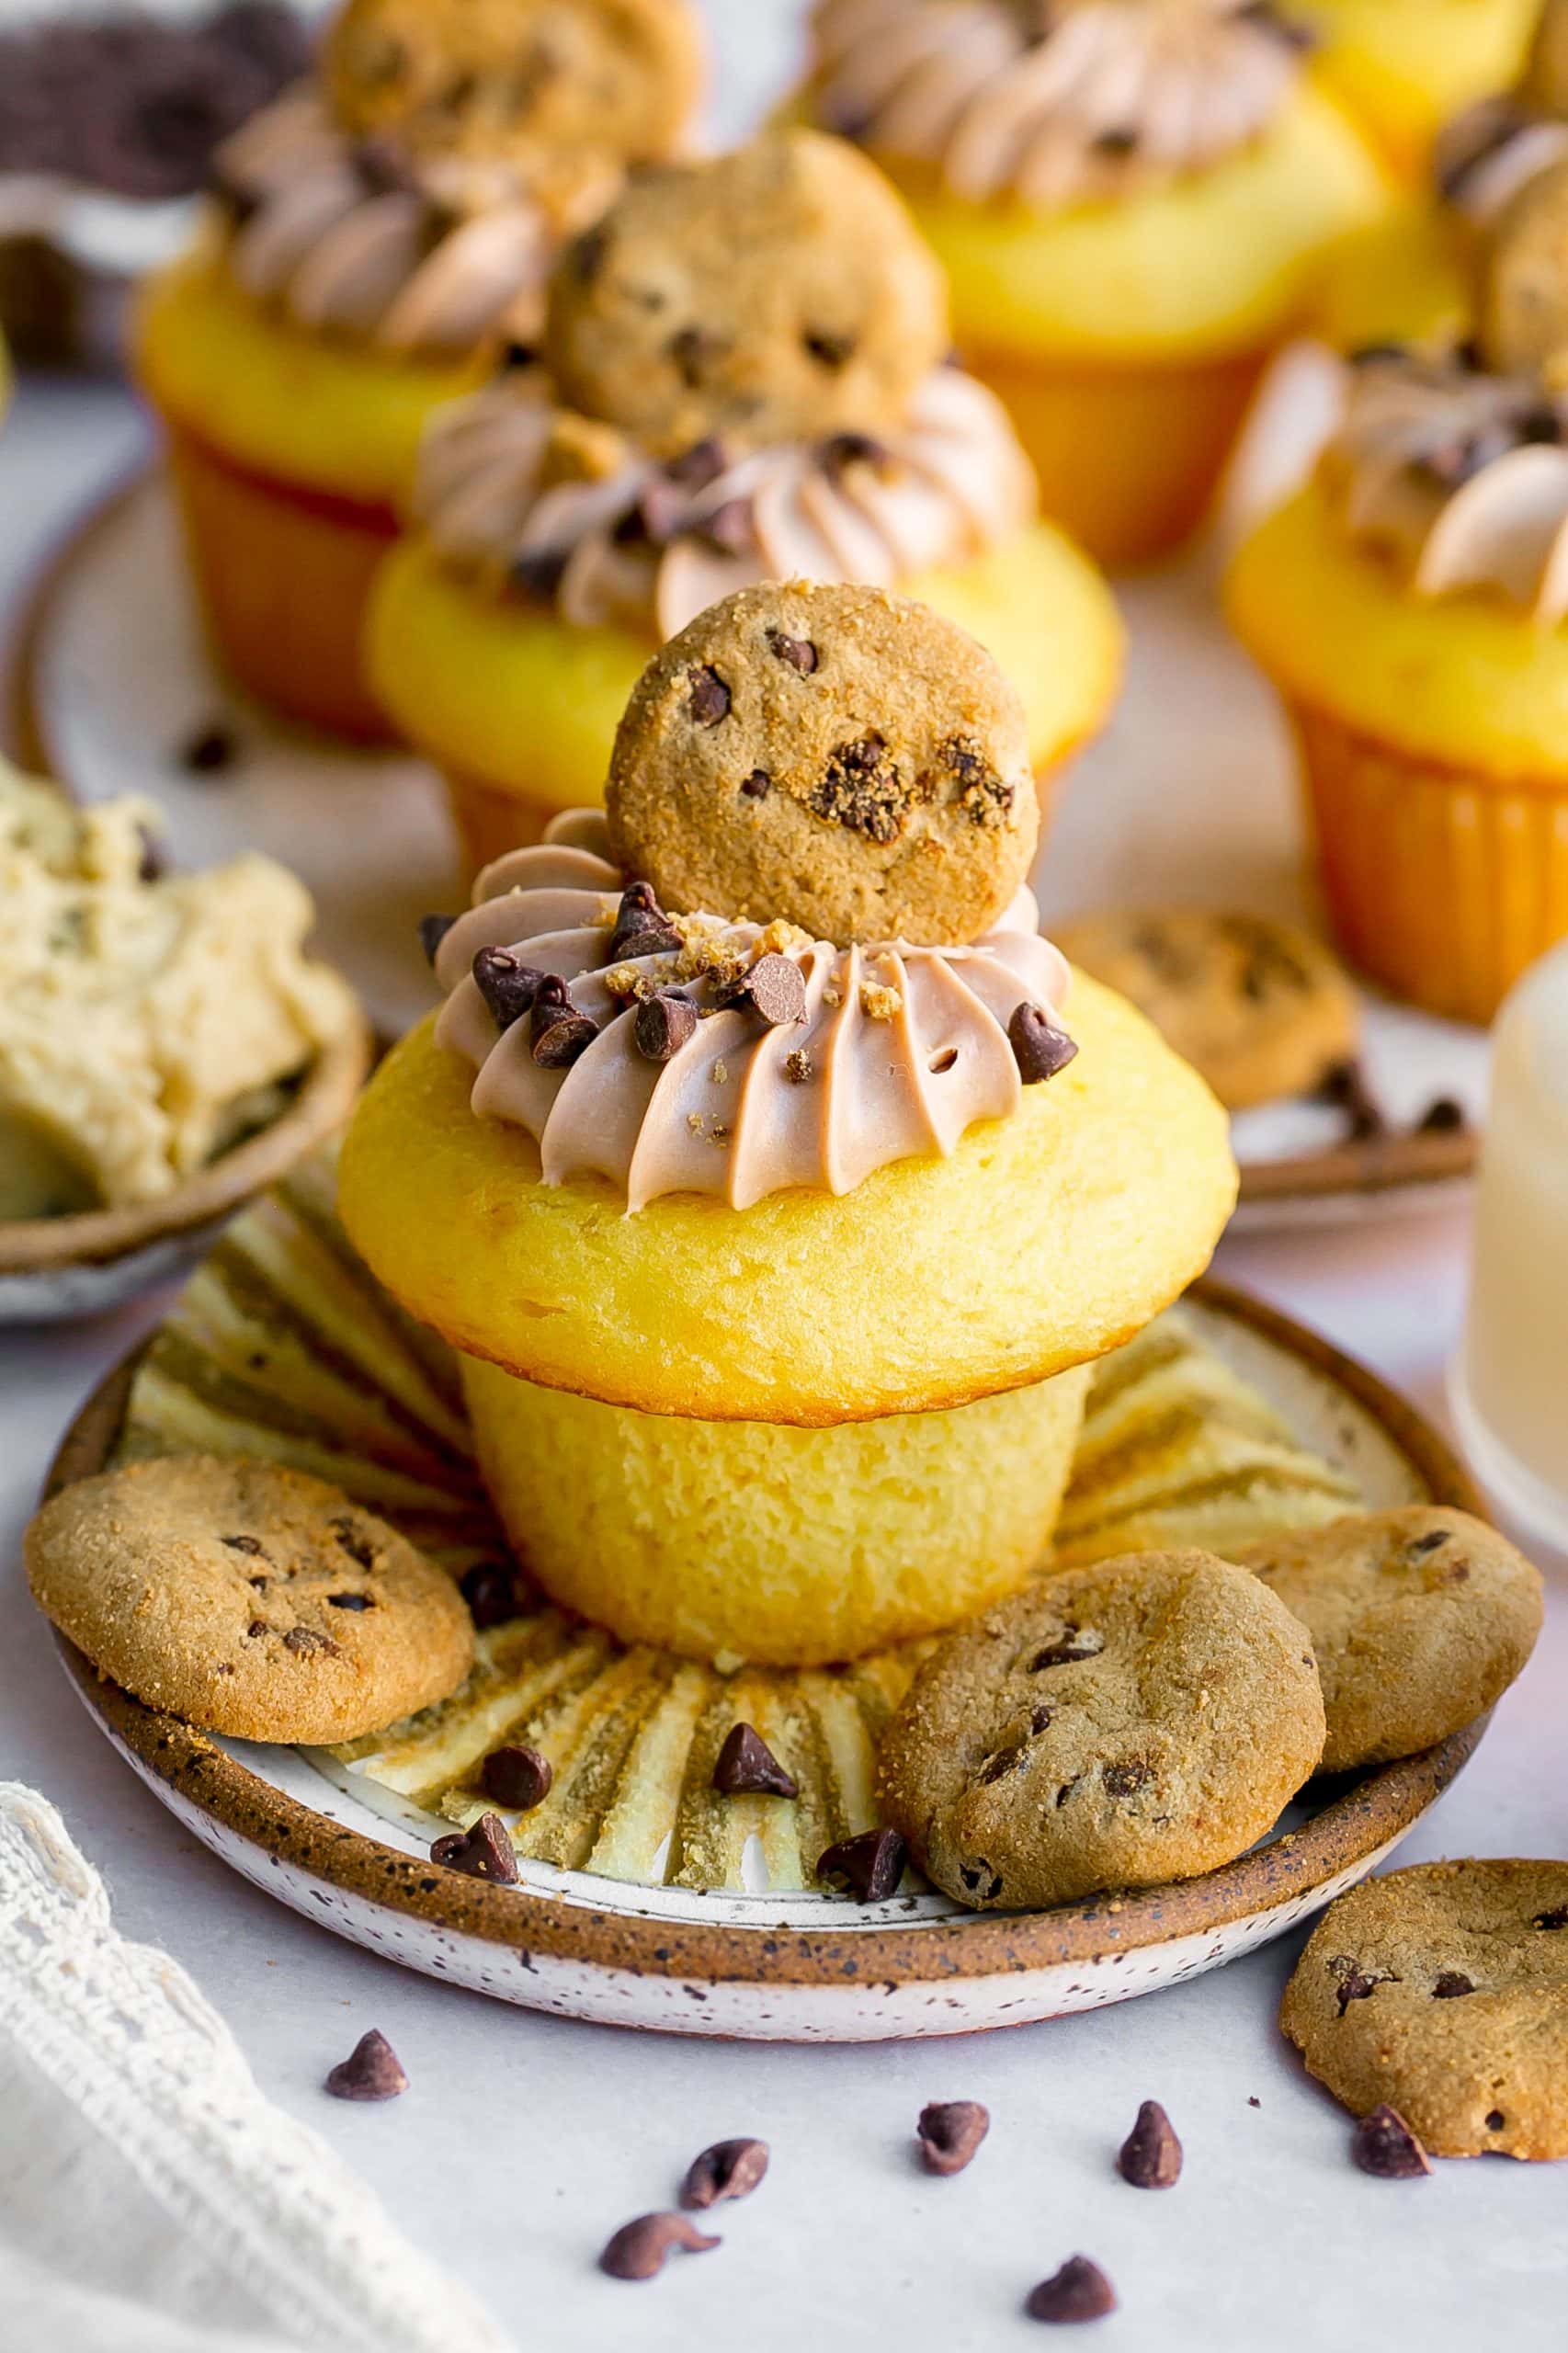 Cupcakes with chocolate frosting and mini cookie on top.